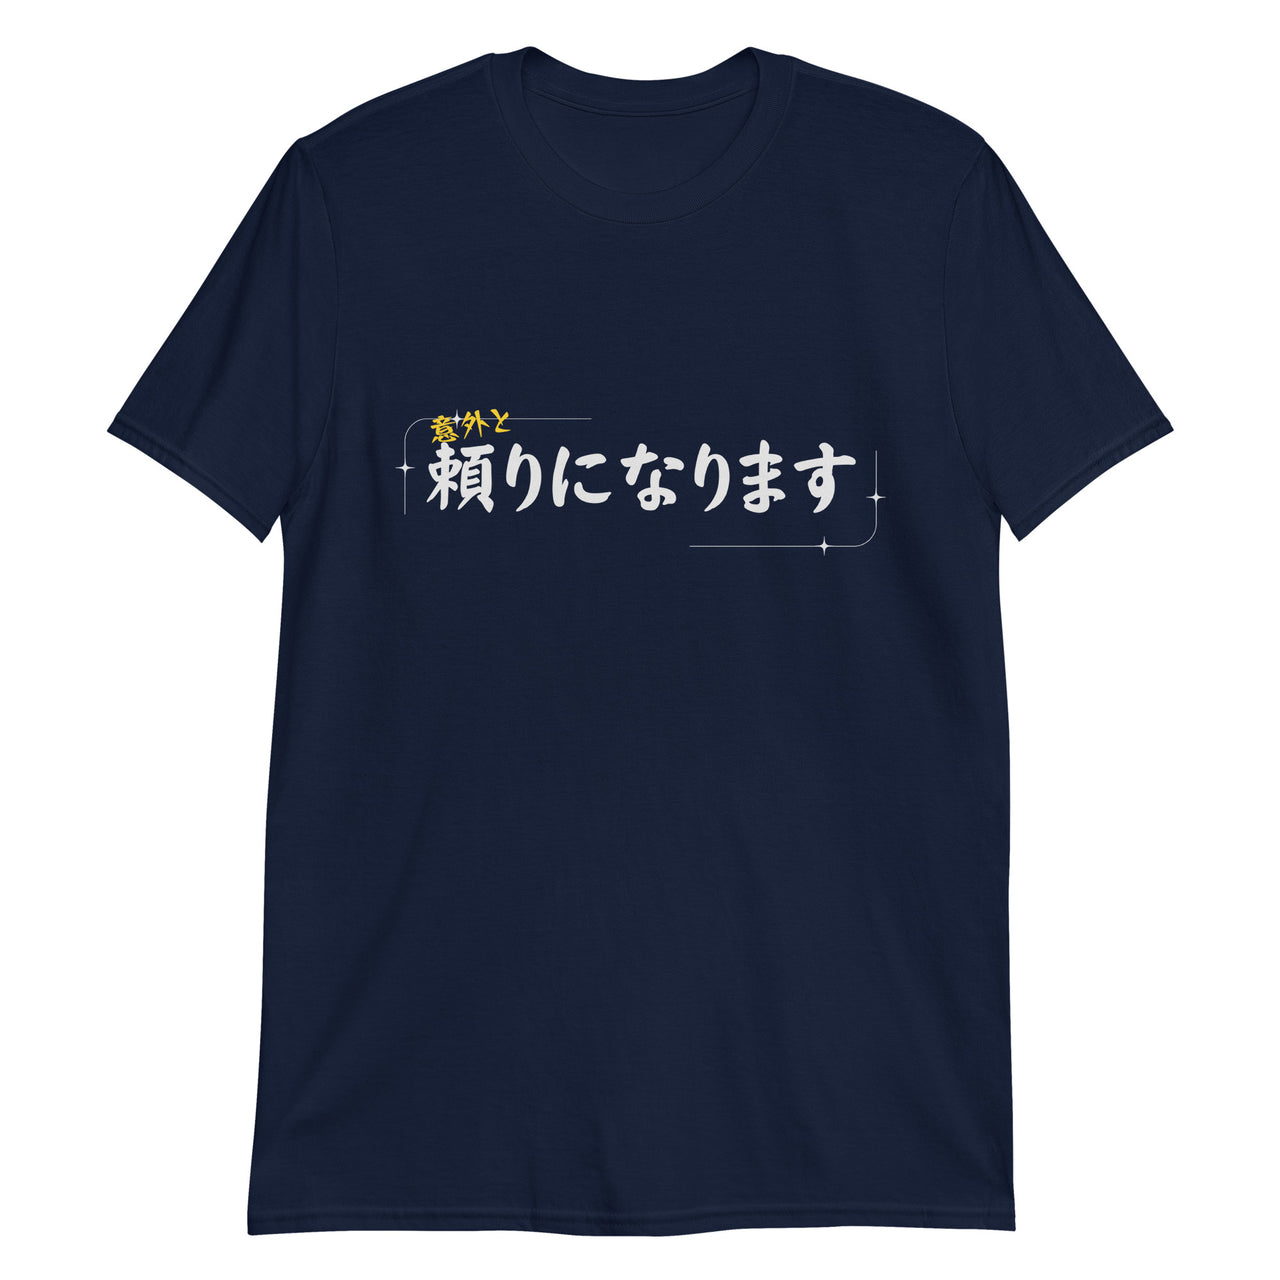 Surprisingly Reliable in Japanese T-Shirt